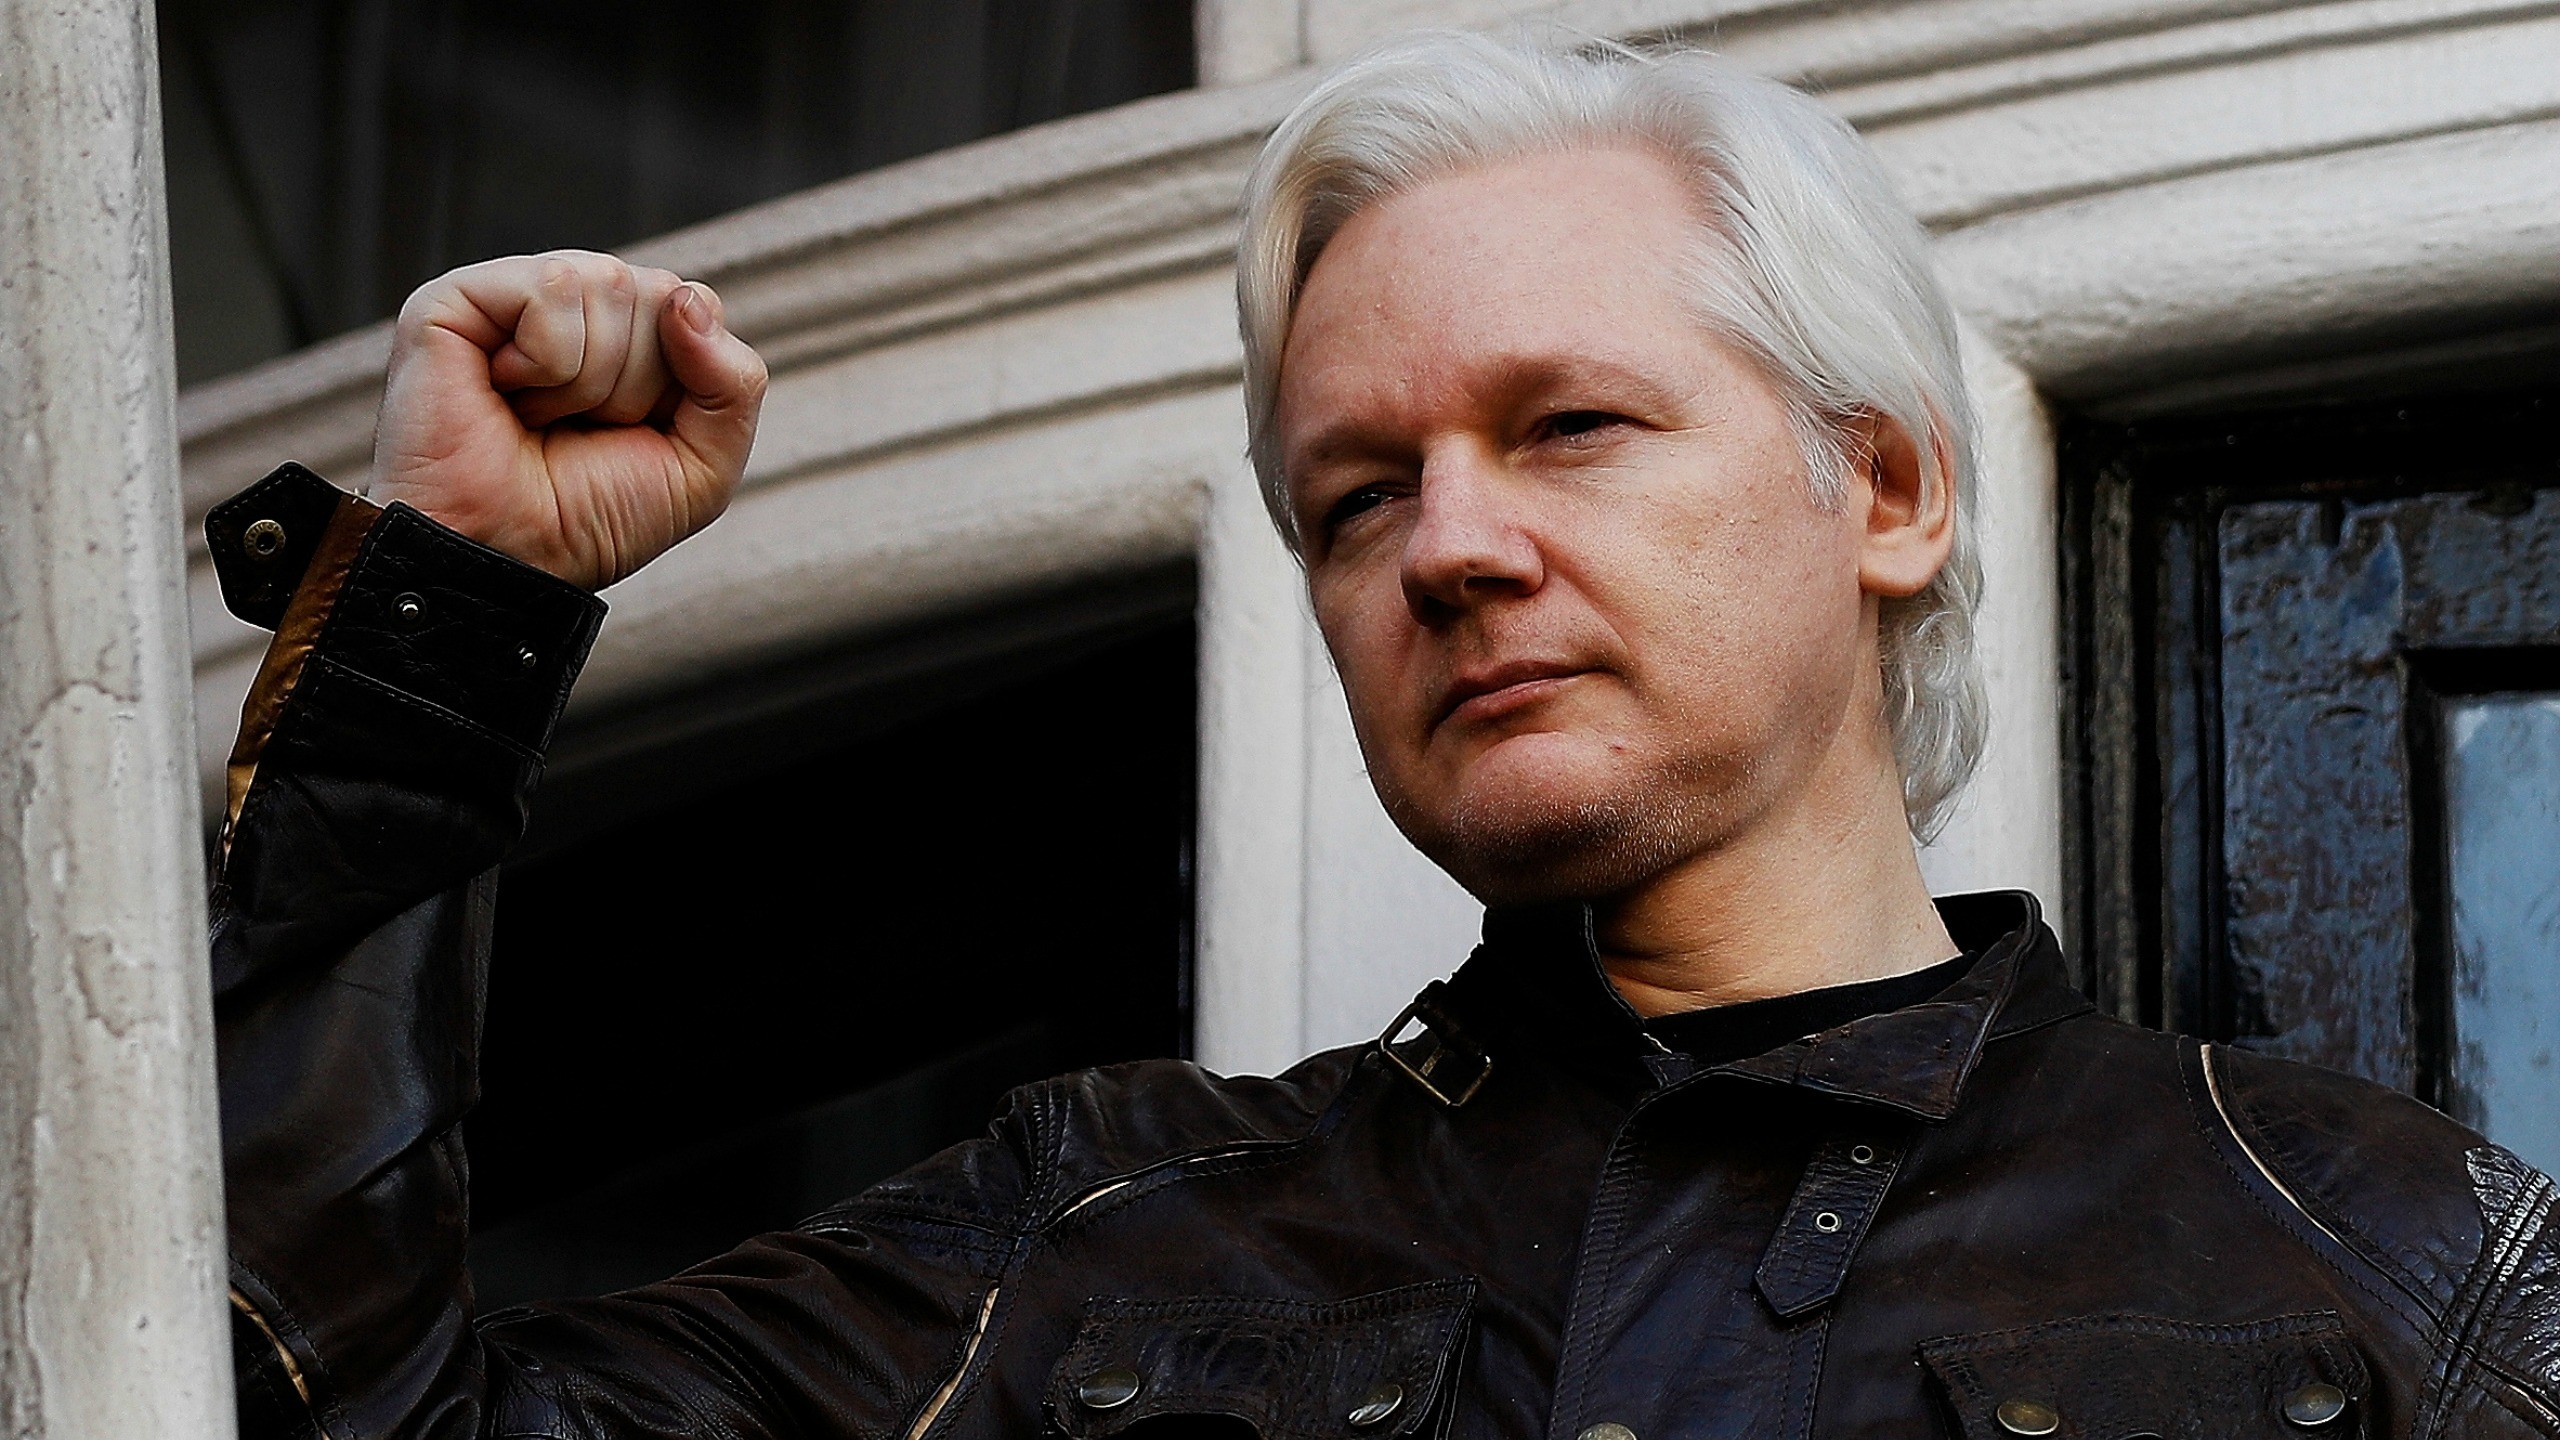 2560x1440 Julian Assange Blasts 'Neocon' Daily Beast, Mangles Facts - The Daily Beast